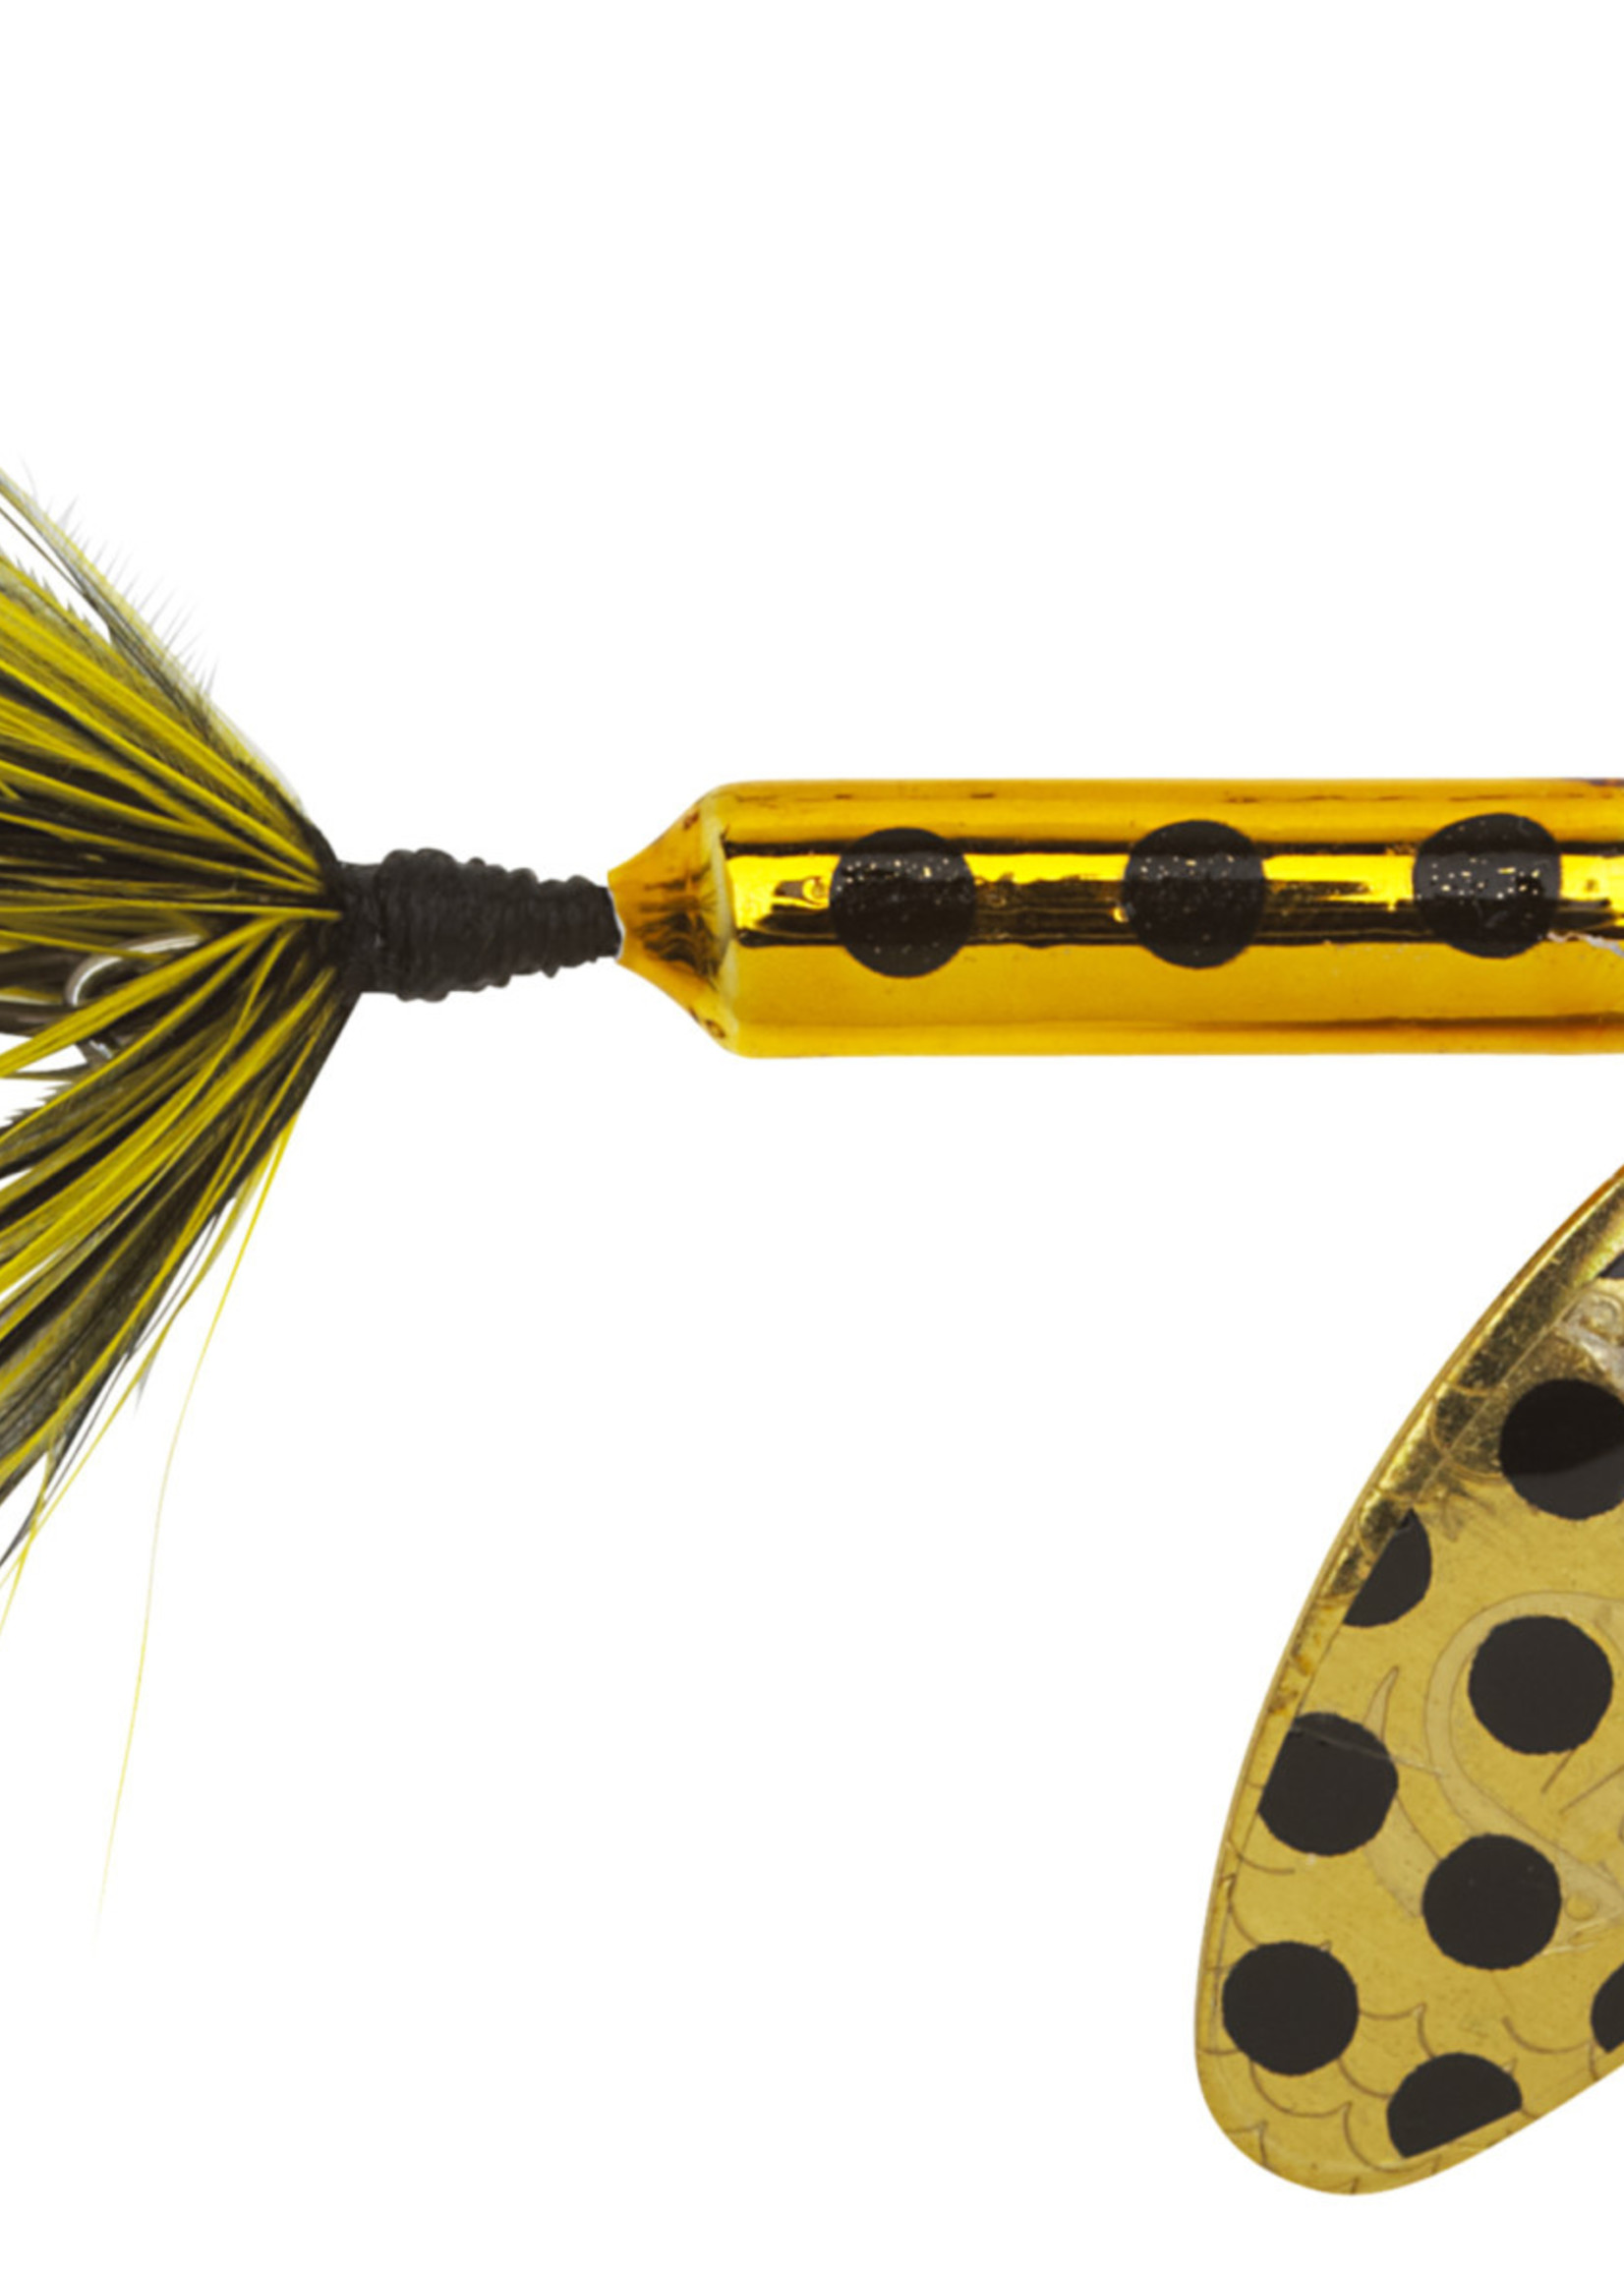 Worden's Rooster Tail Spinner Lure 1/16 Oz. - Metallic Gold Spot